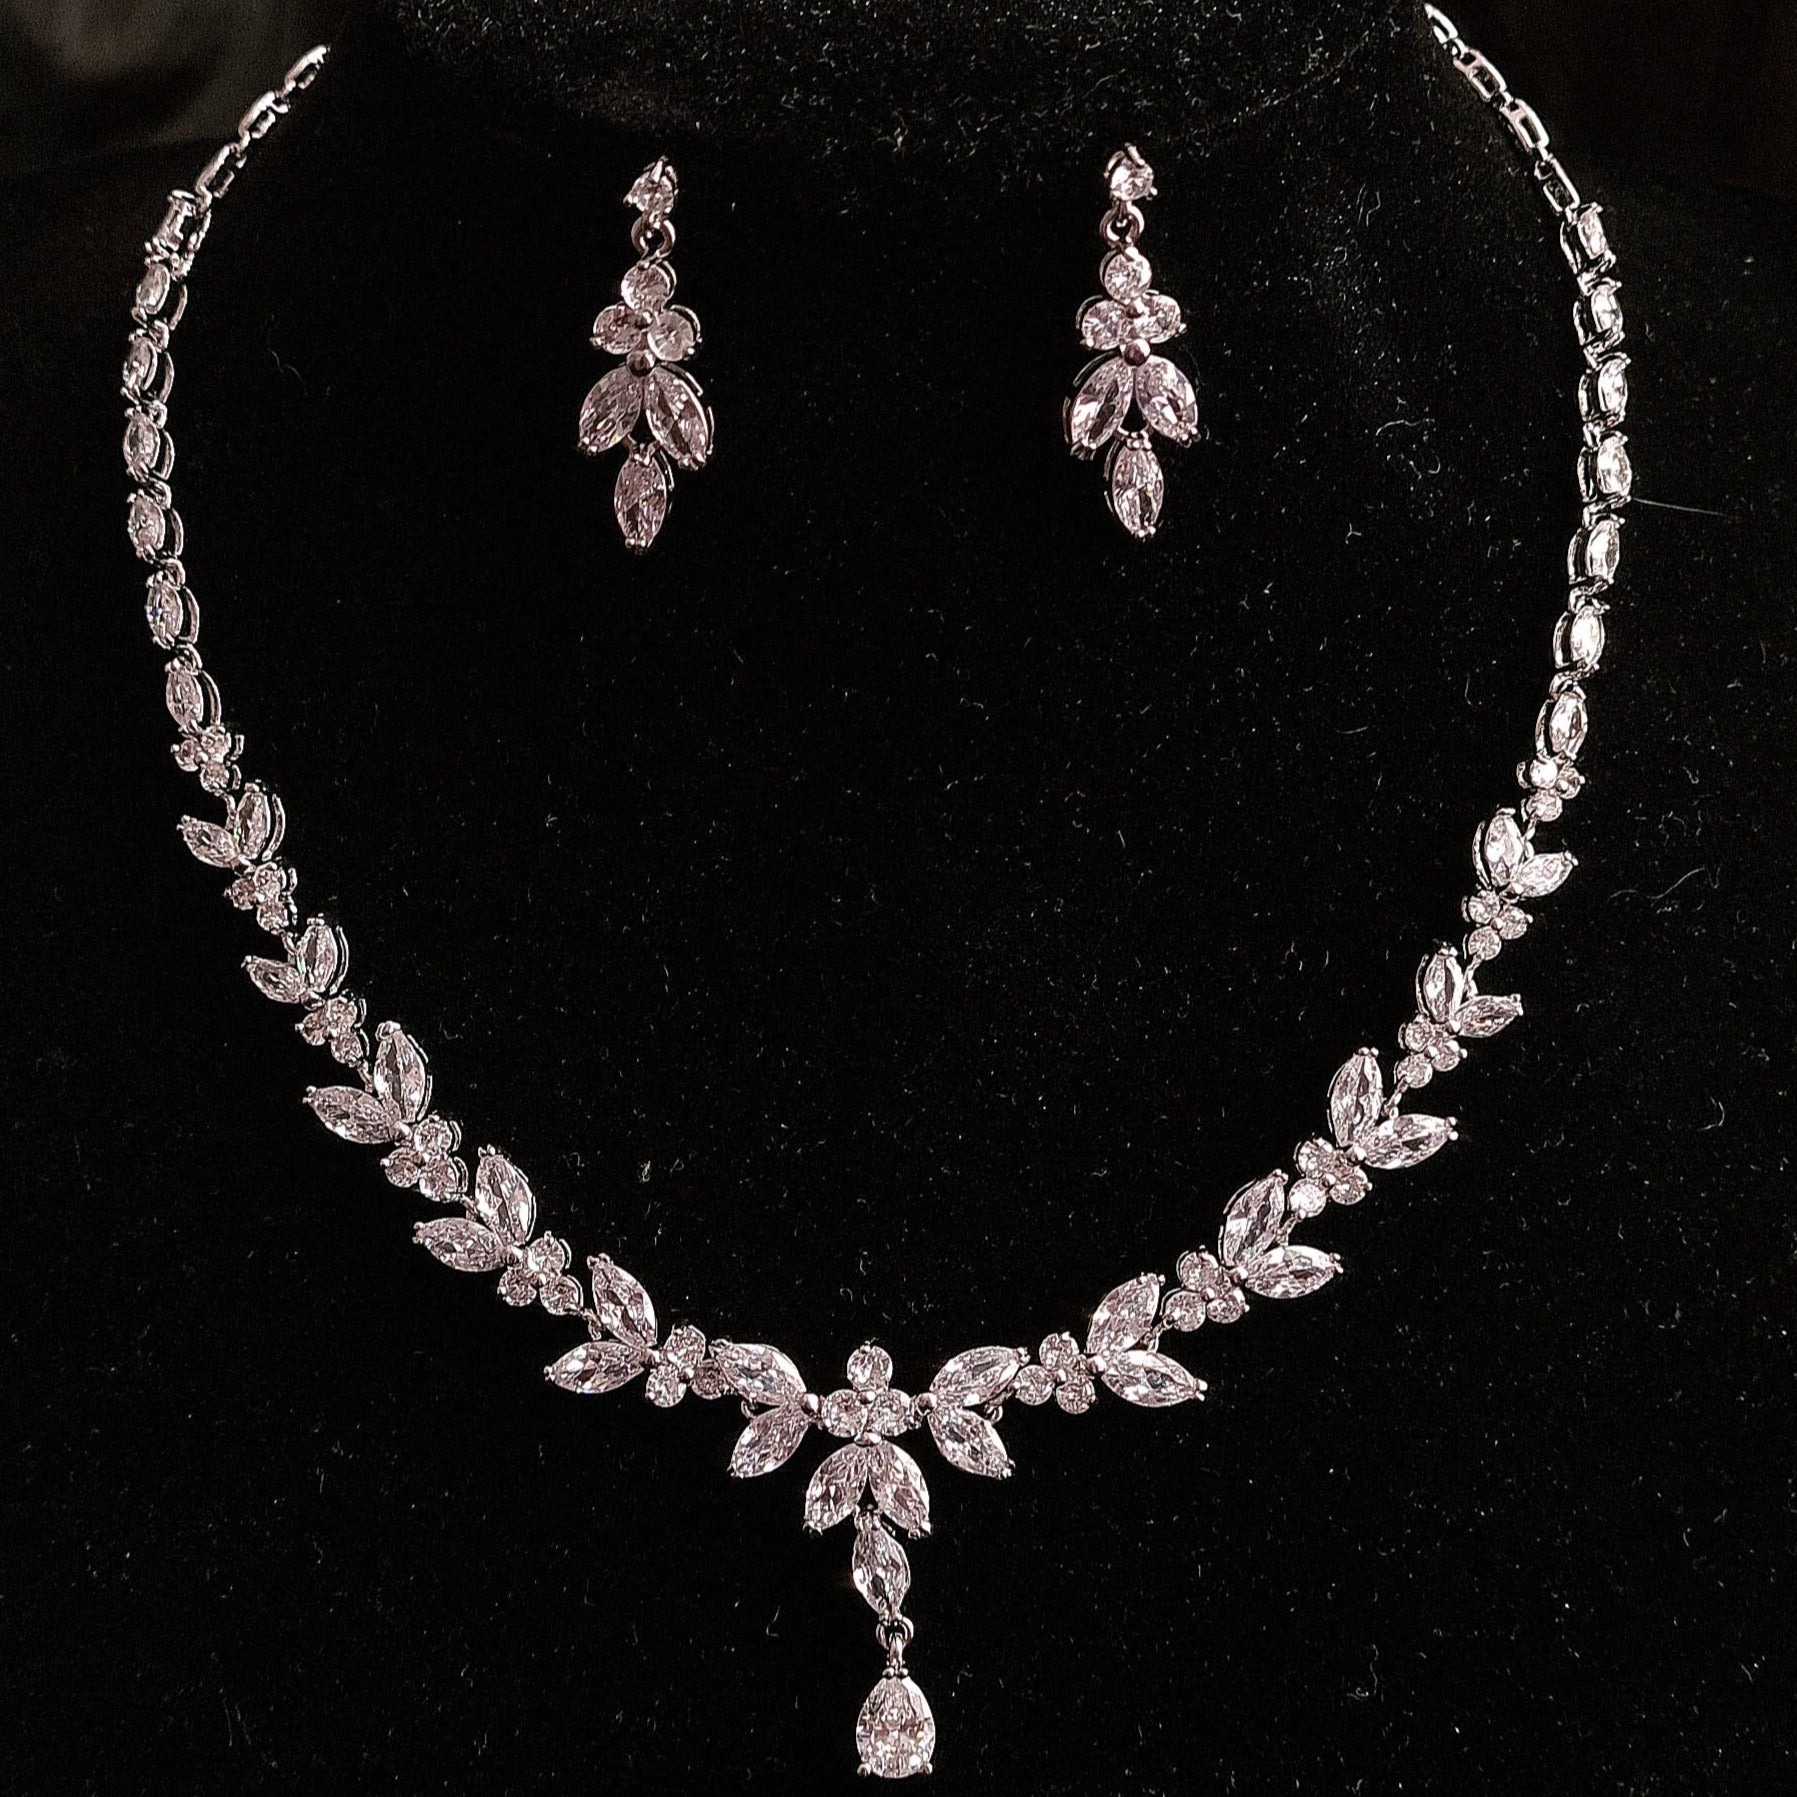 Elegant jewelry set featuring cubic zirconia earrings and necklace on display.